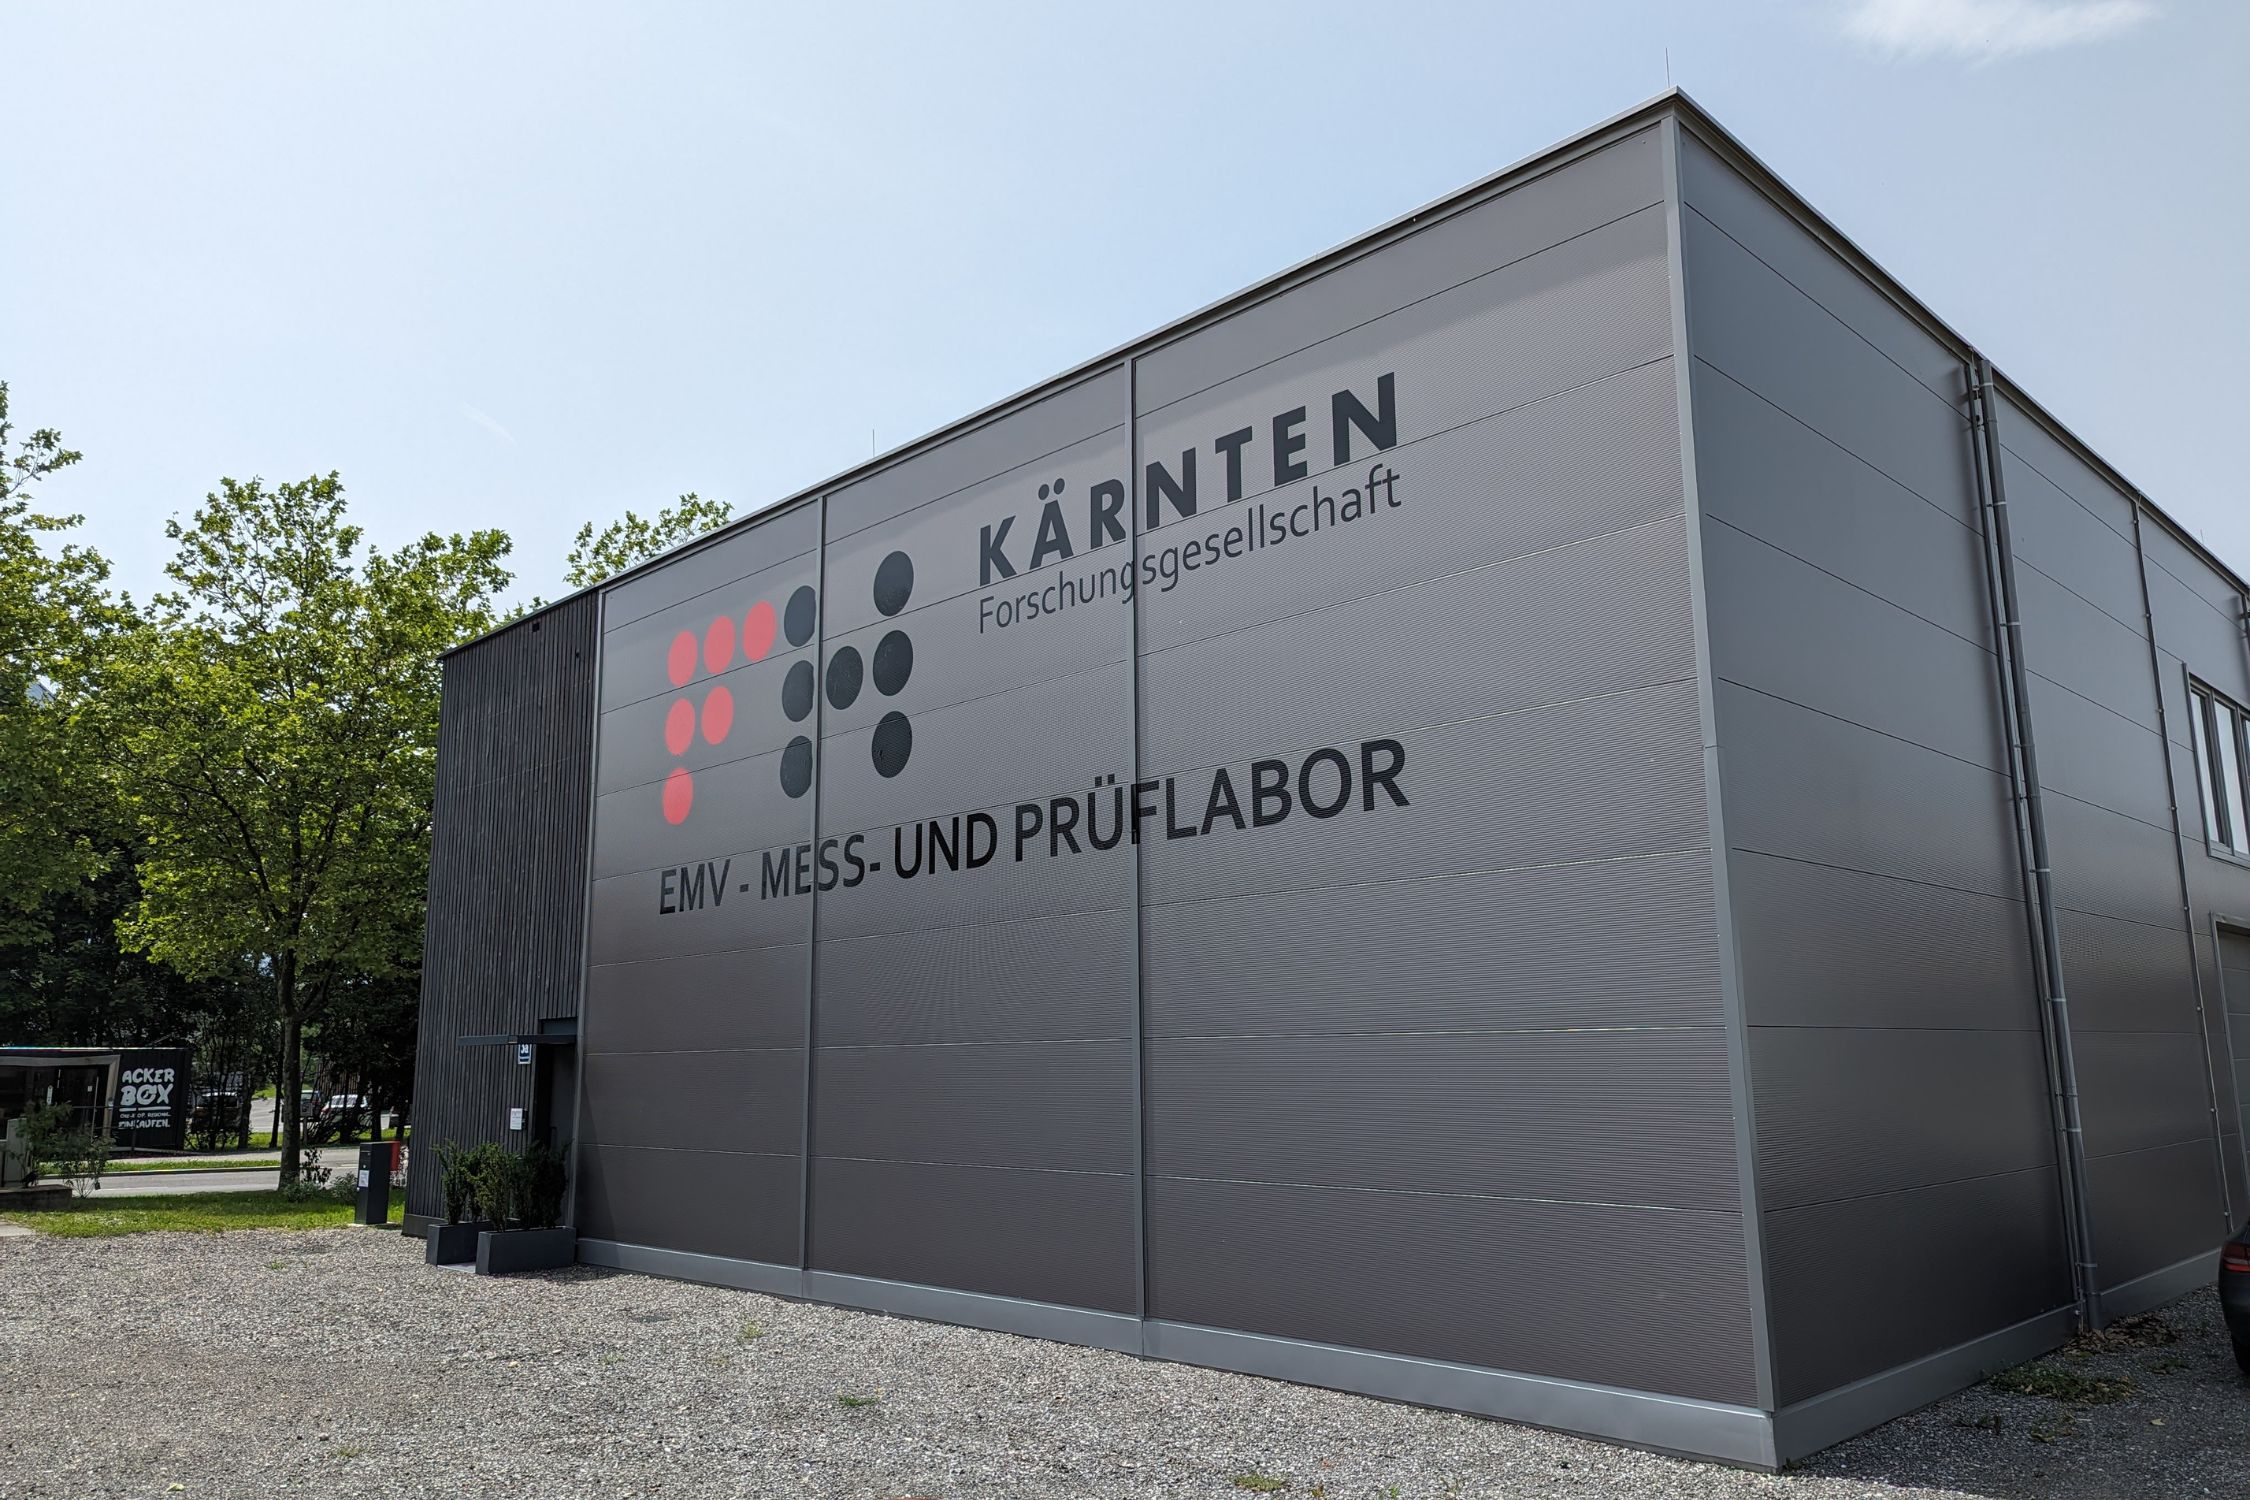 The EMV Labor on its new site in Villach